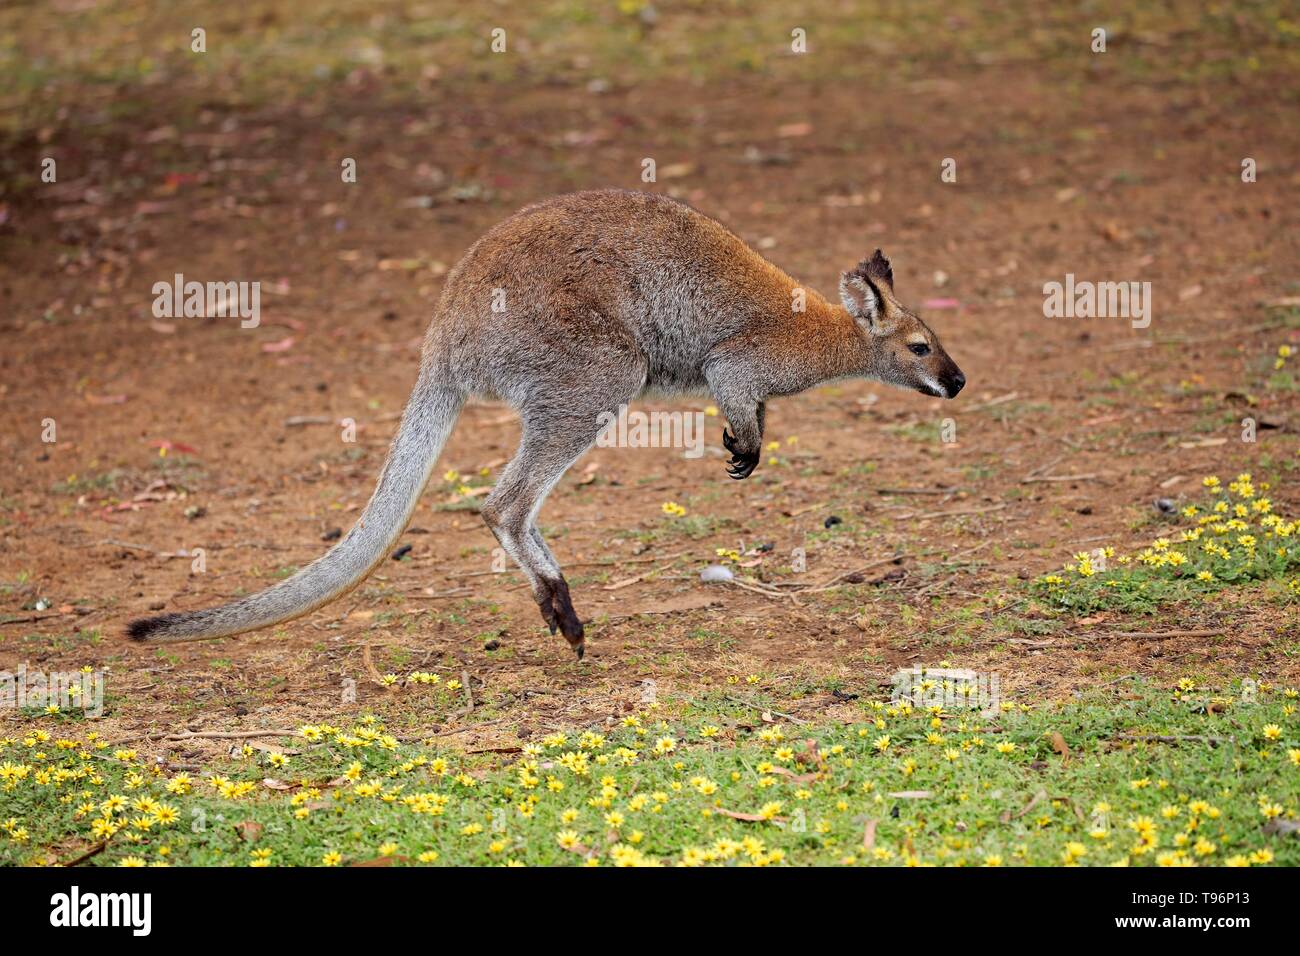 Red-necked wallaby (Macropus rufogriseus), adult jumping, Cuddly Creek, South Australia, Australia Stock Photo